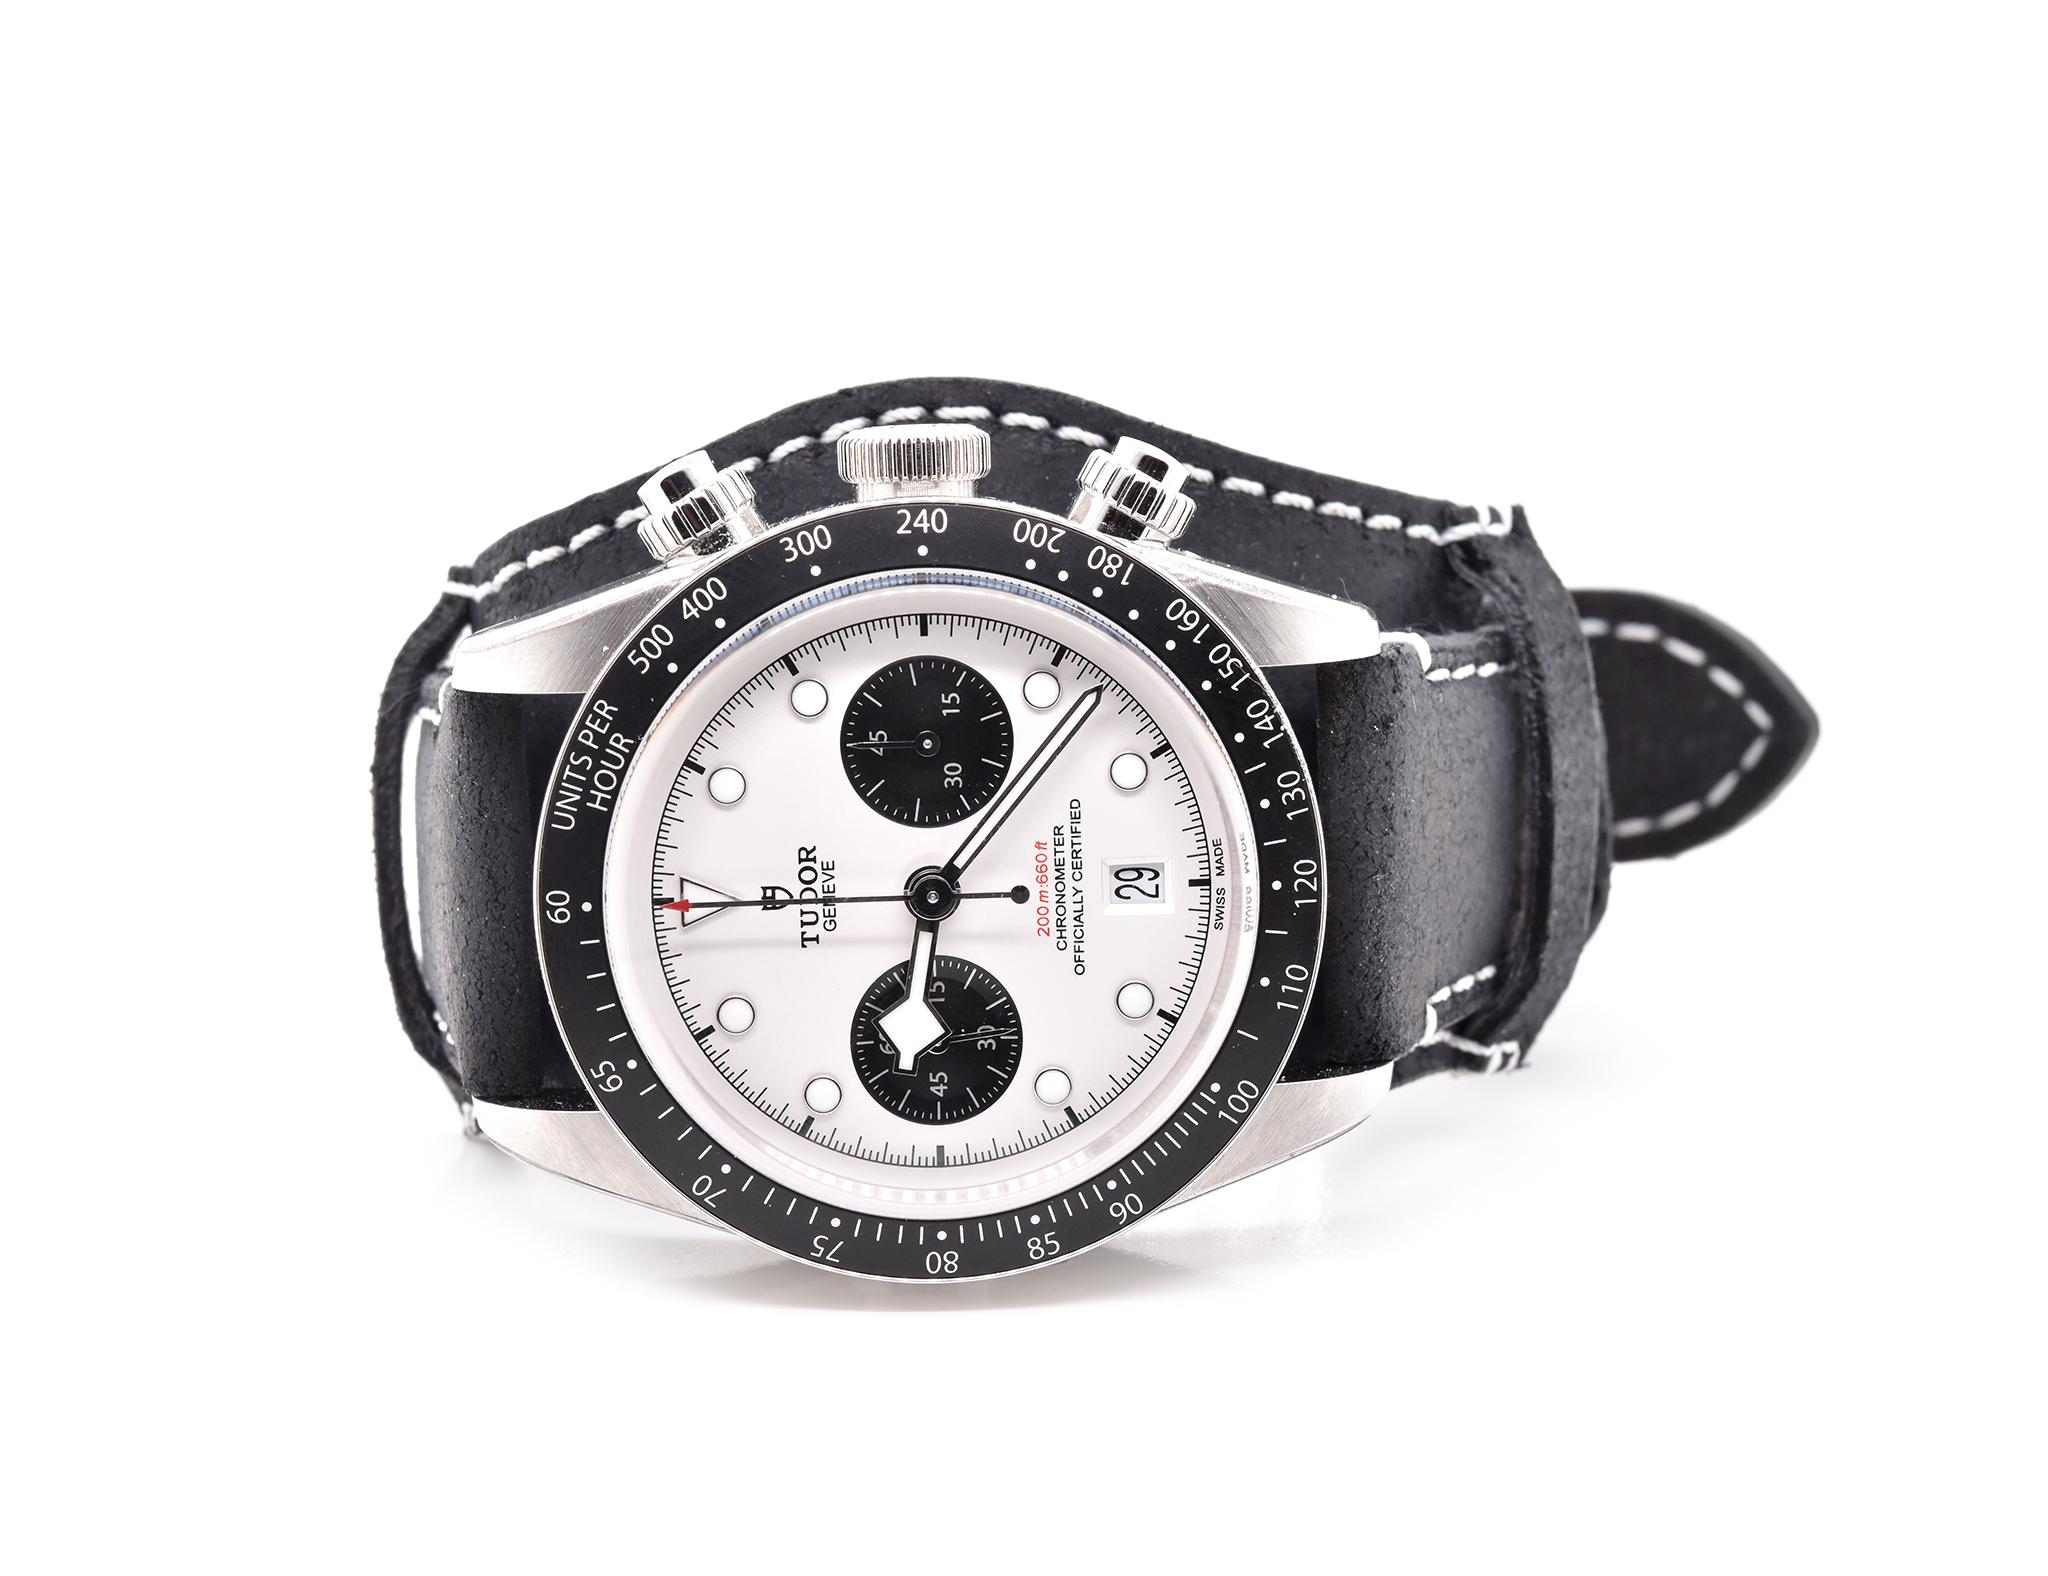 Movement: automatic
Function: chronograph, hour, minute, small second, power reserve
Case: round 41mm stainless steel case, screw-down crown, sapphire protective crystal, black tachymeter bezel
Dial: white luminous dot dial
Band: Tudor black fabric